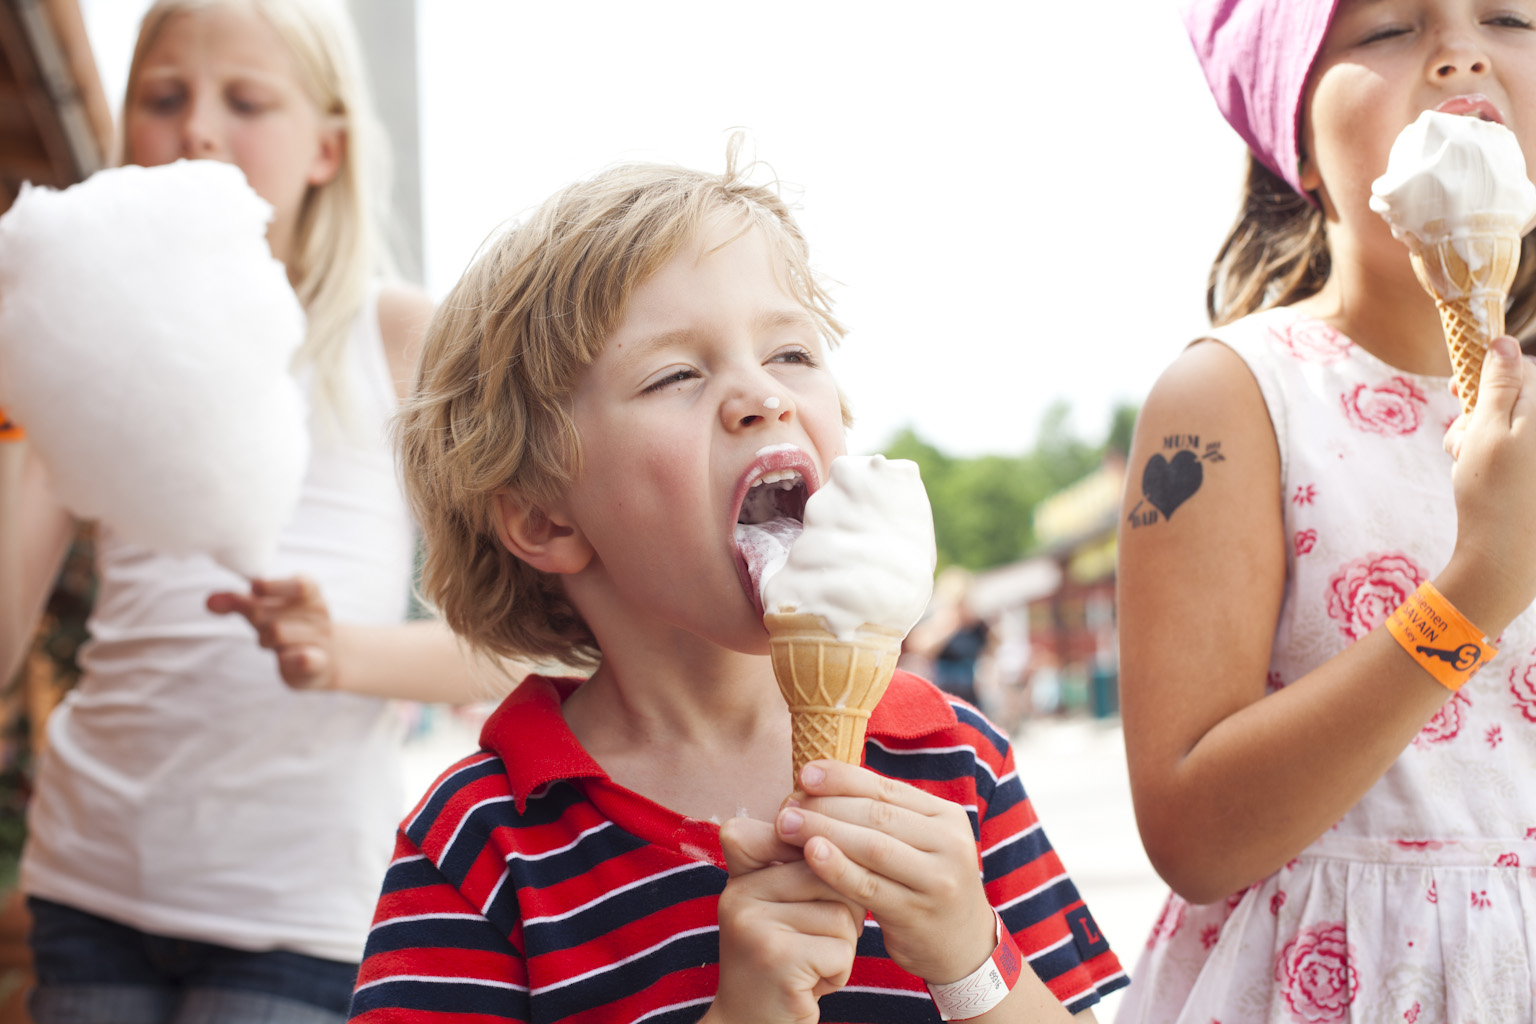 Children eating ice cream and cotton candy